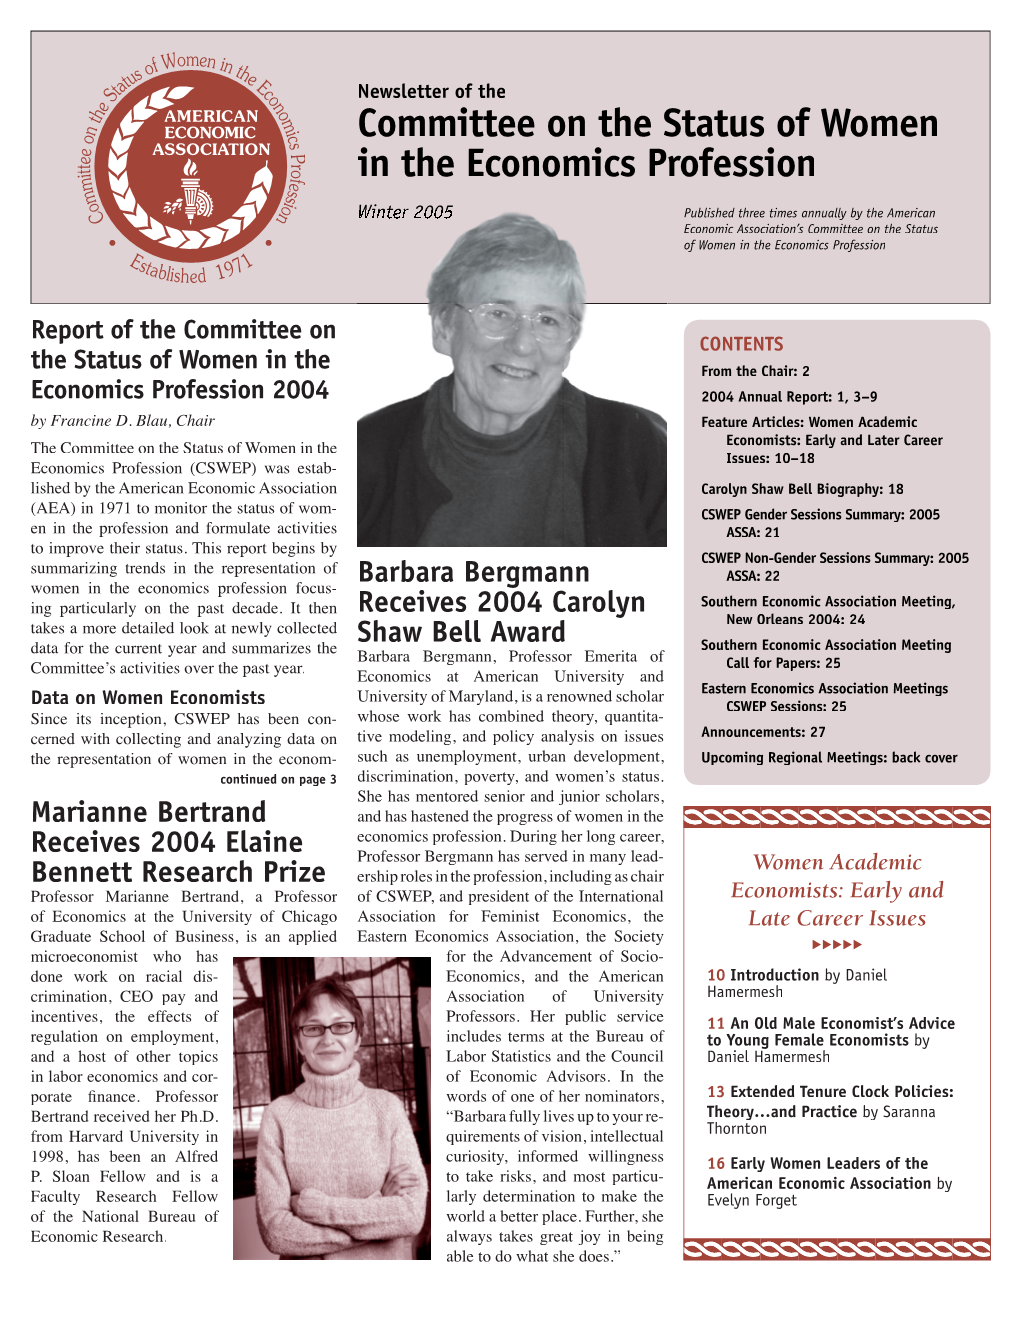 Winter 2005 Published Three Times Annually by the American Economic Association’S Committee on the Status of Women in the Economics Profession